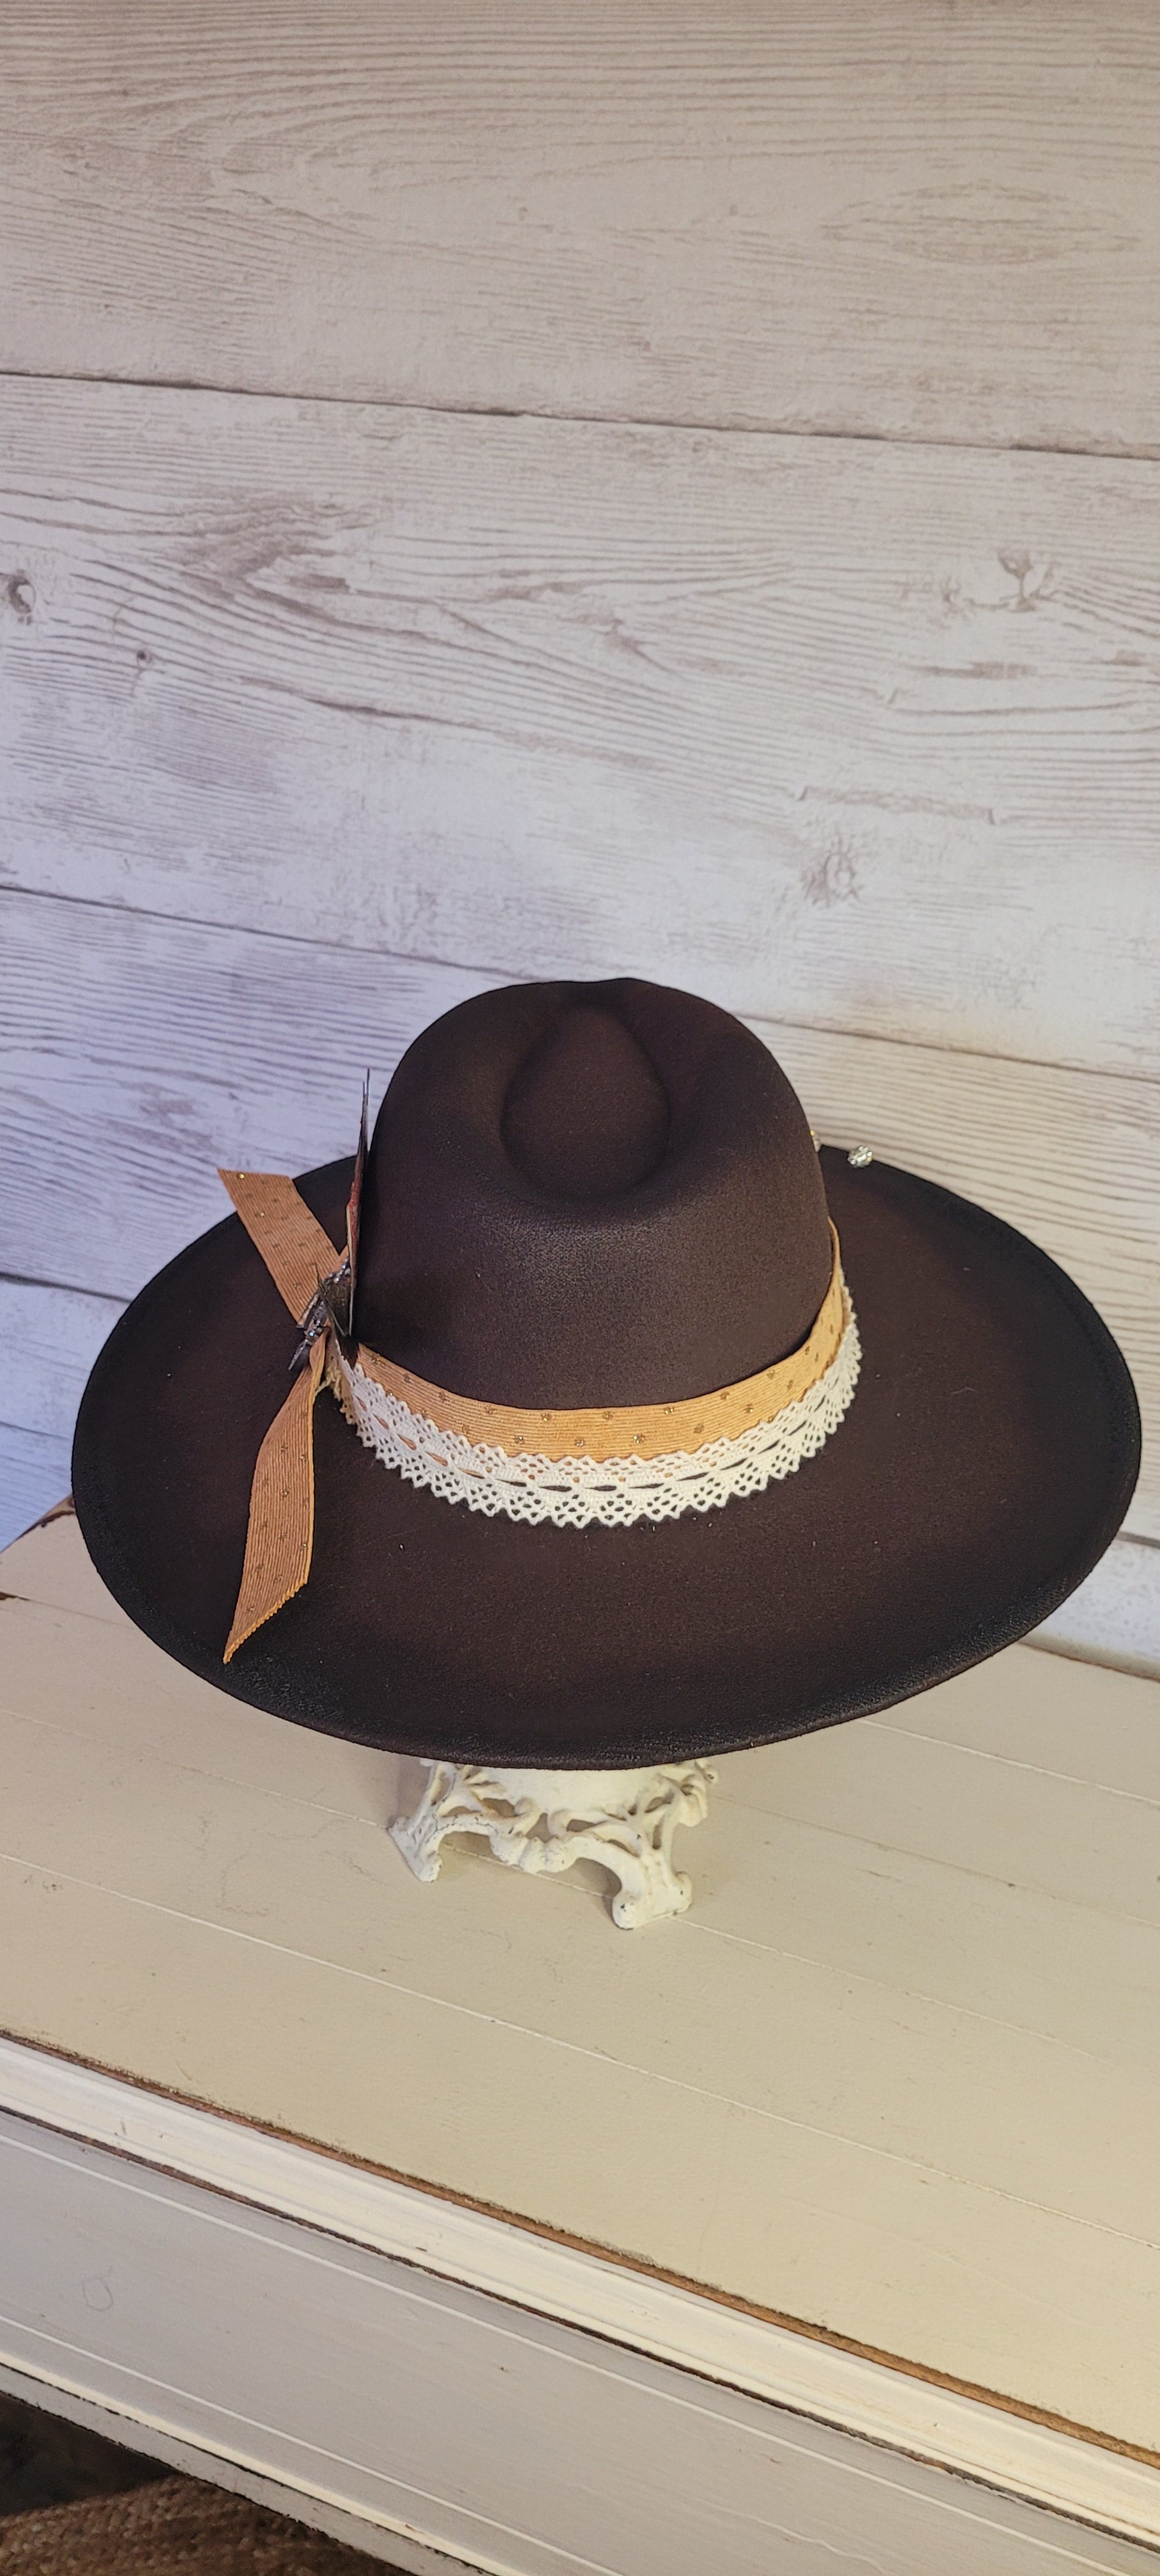 Features natural lace ribbon, corduroy ribbon, feather, playing cards, pistol brooch, & rhinestone beads Felt hat Flat brim 65% polyester and 35% cotton Ribbon drawstring for hat size adjustment Head Circumference: 24" Crown Height: 5" Brim Length: 15.75" Brim Width: 14.5" Branded & numbered inside crown Custom designed by Kayla